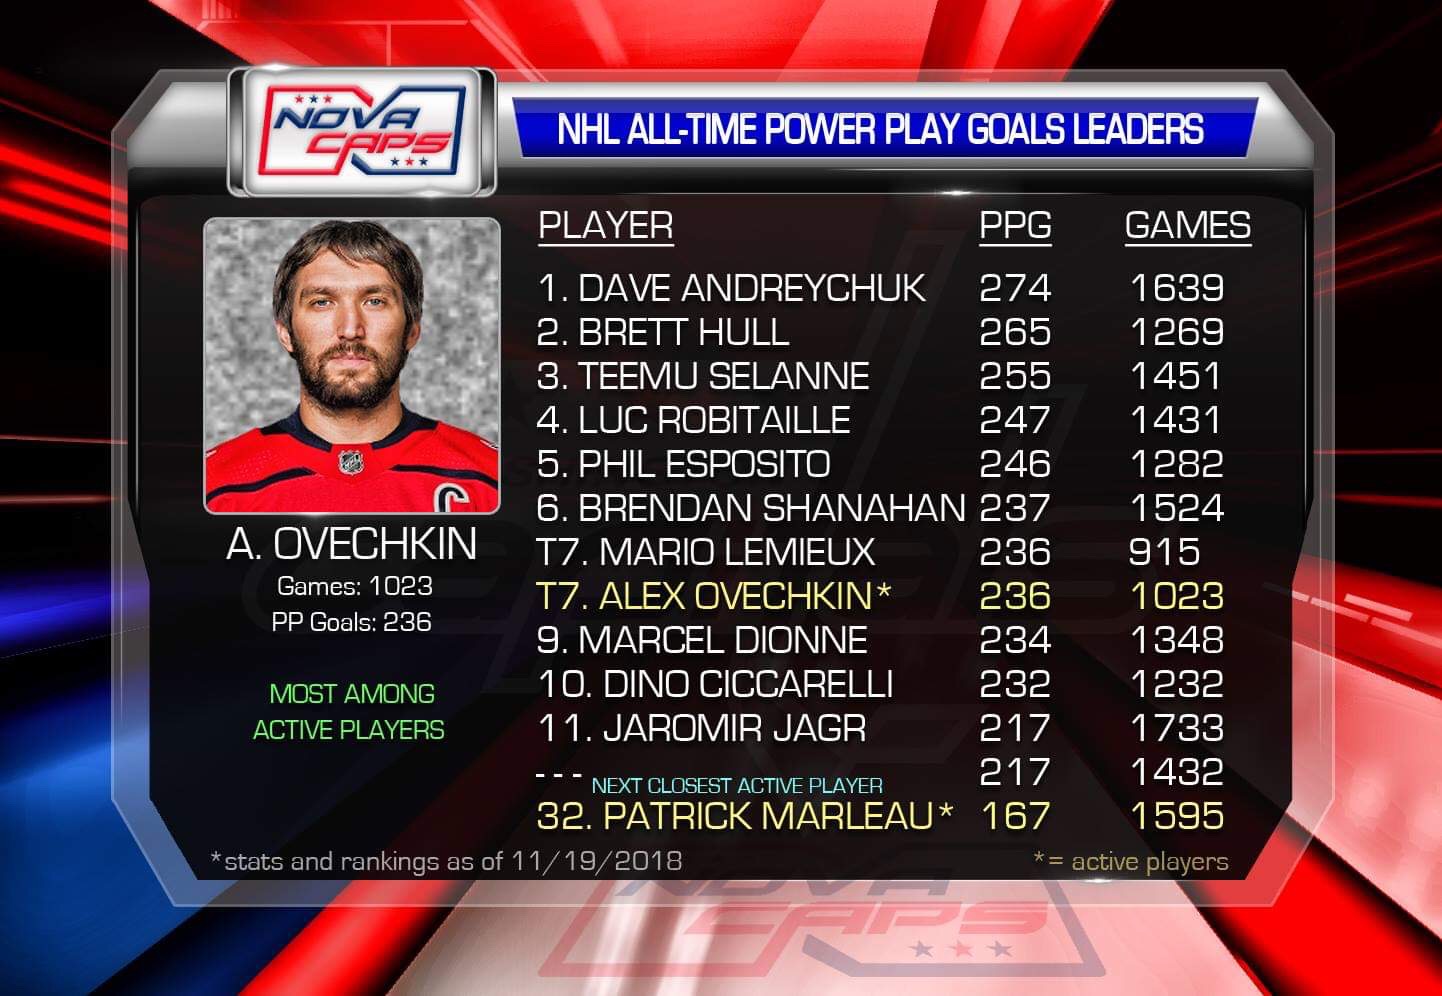 nhl all time leaders